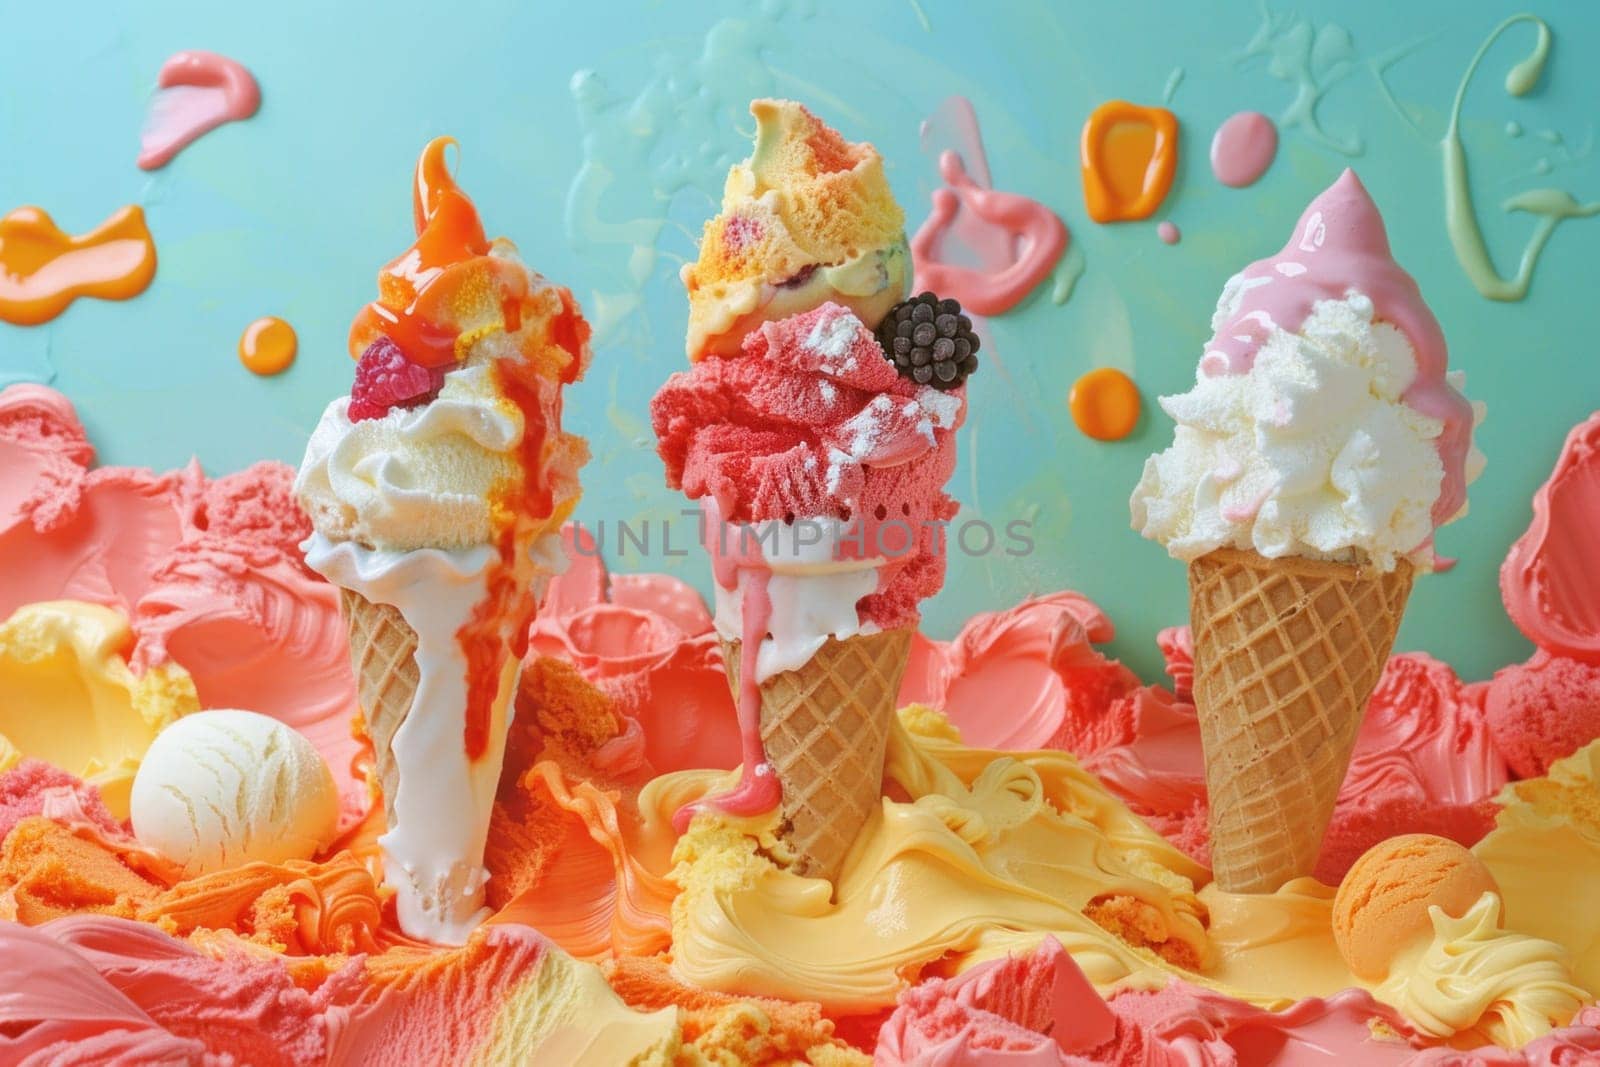 Colorful ice cream cones sitting on top of a vibrant pile of pink and orange ice cream, tempting treat for a summer trip by Vichizh